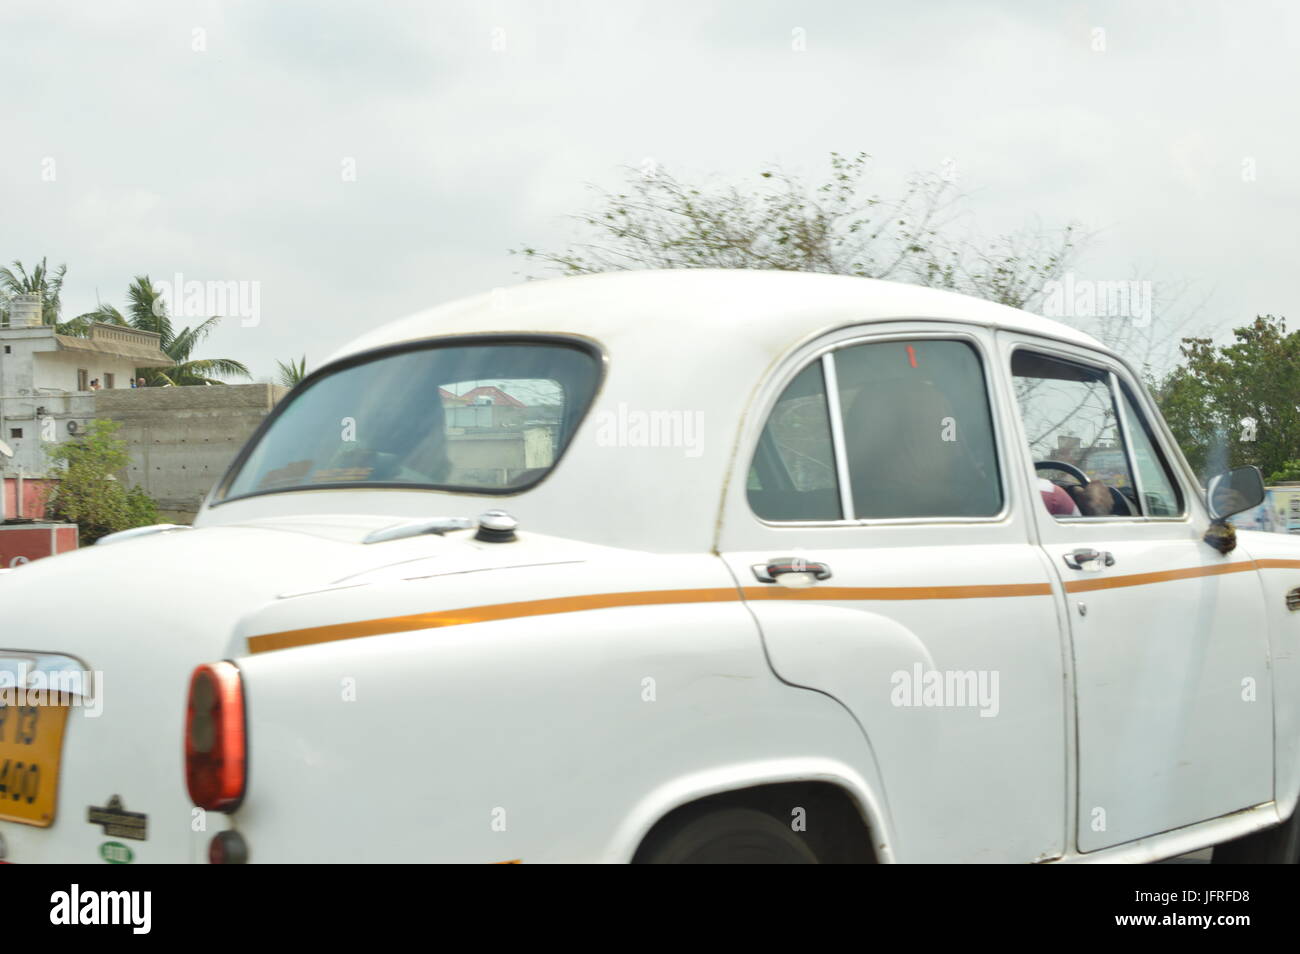 Ambassadors; These cars used to be seen everyone in India...now they're a rare finding in nature...only being used for political officers today Stock Photo